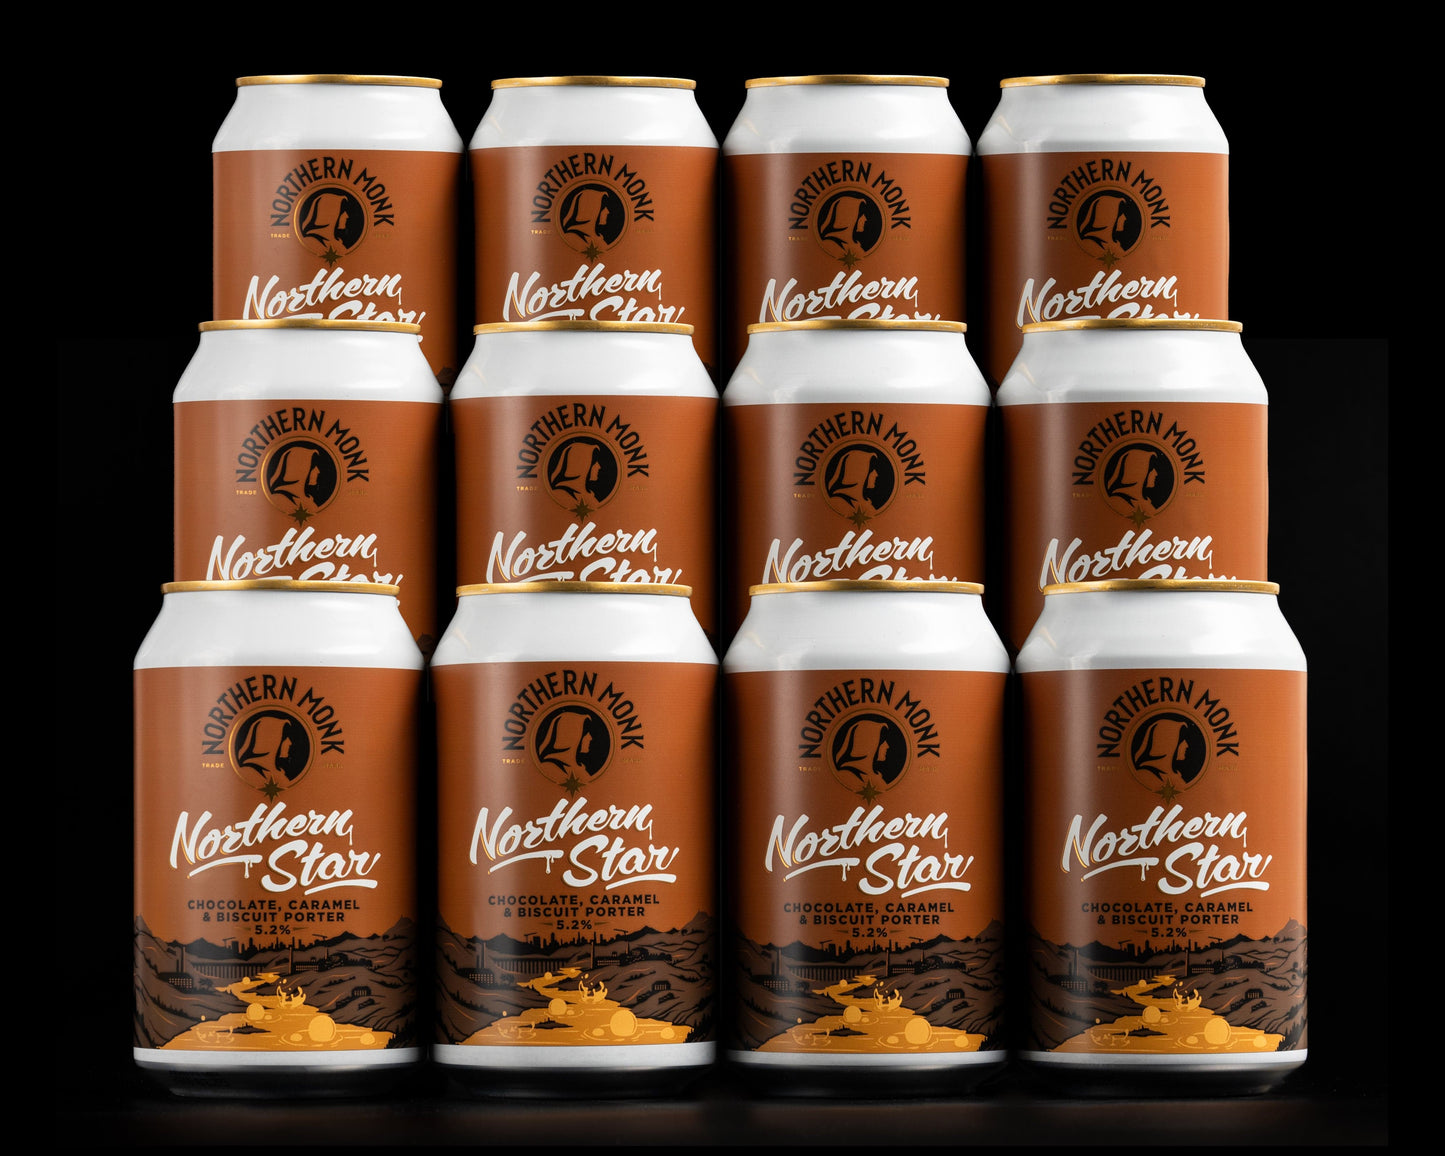 12 PACK // NORTHERN STAR™ 330ml // CHOCOLATE, CARAMEL & BISCUIT PORTER